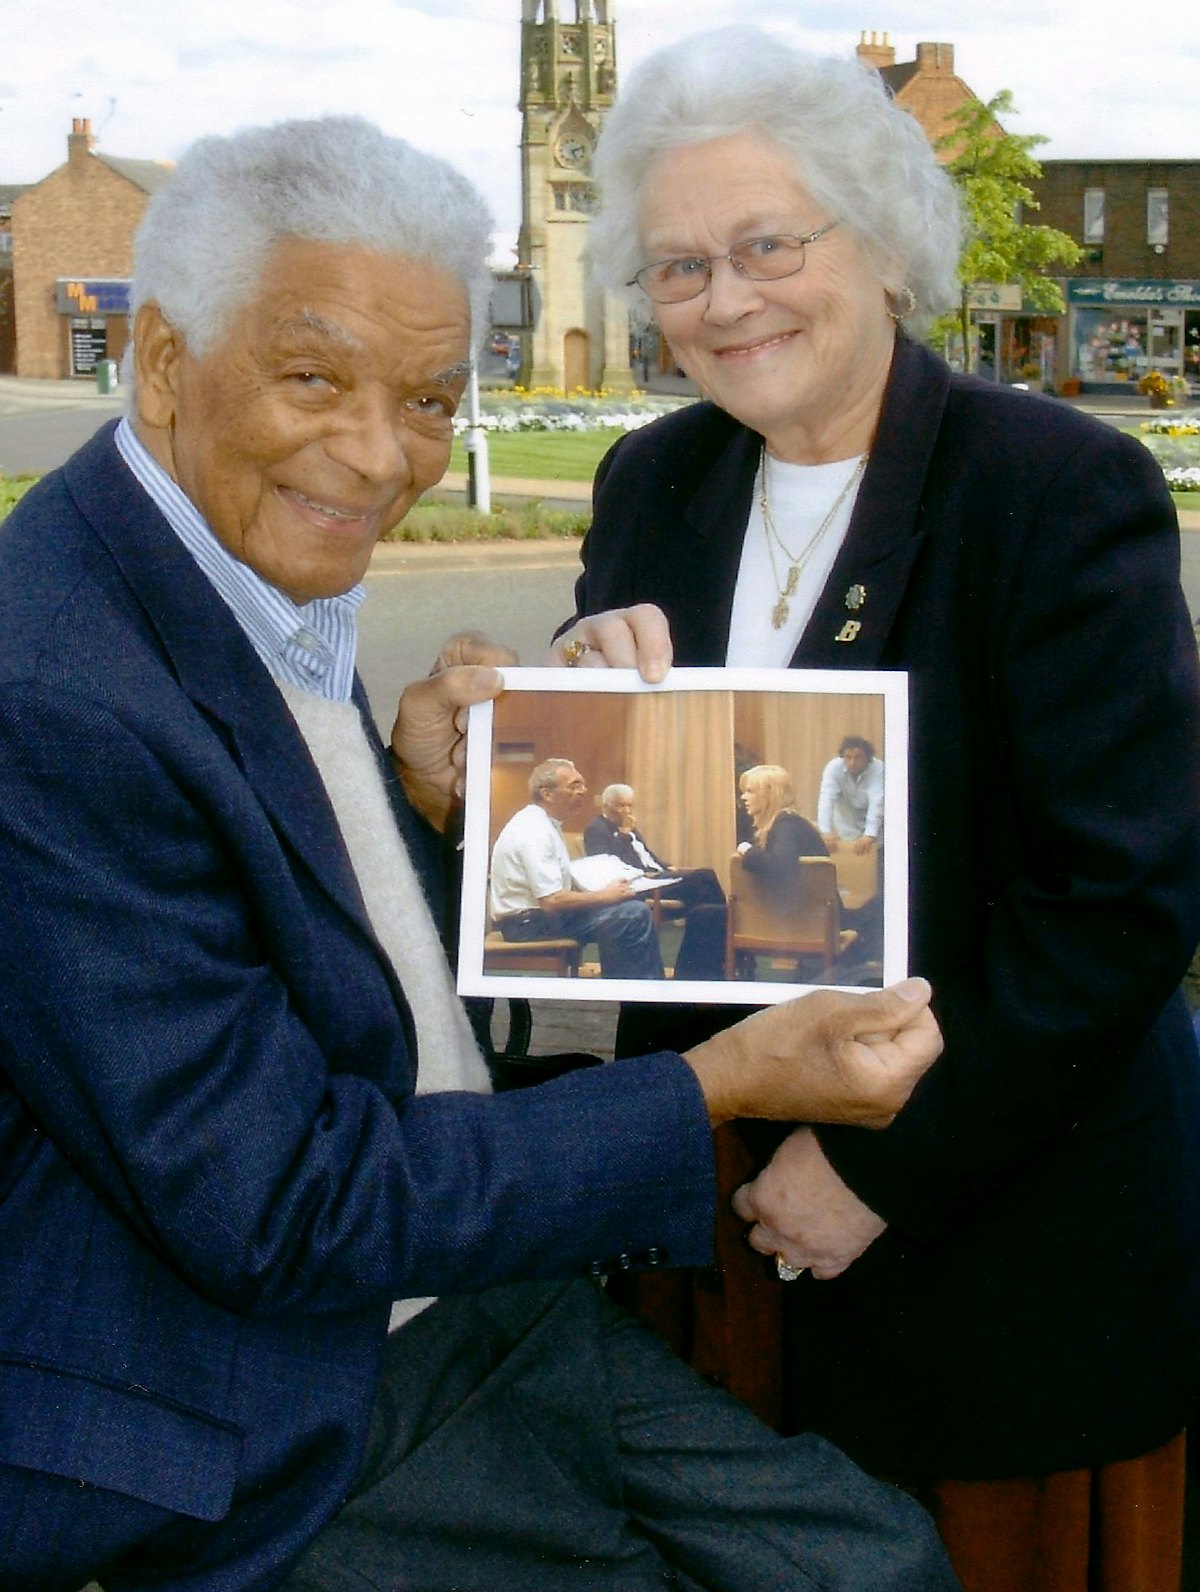 Actor Earl Cameron and his wife, Barbara, with a photograph taken on the set of "The Interpreter." Photo courtesy of Kenilworth Weekly News.